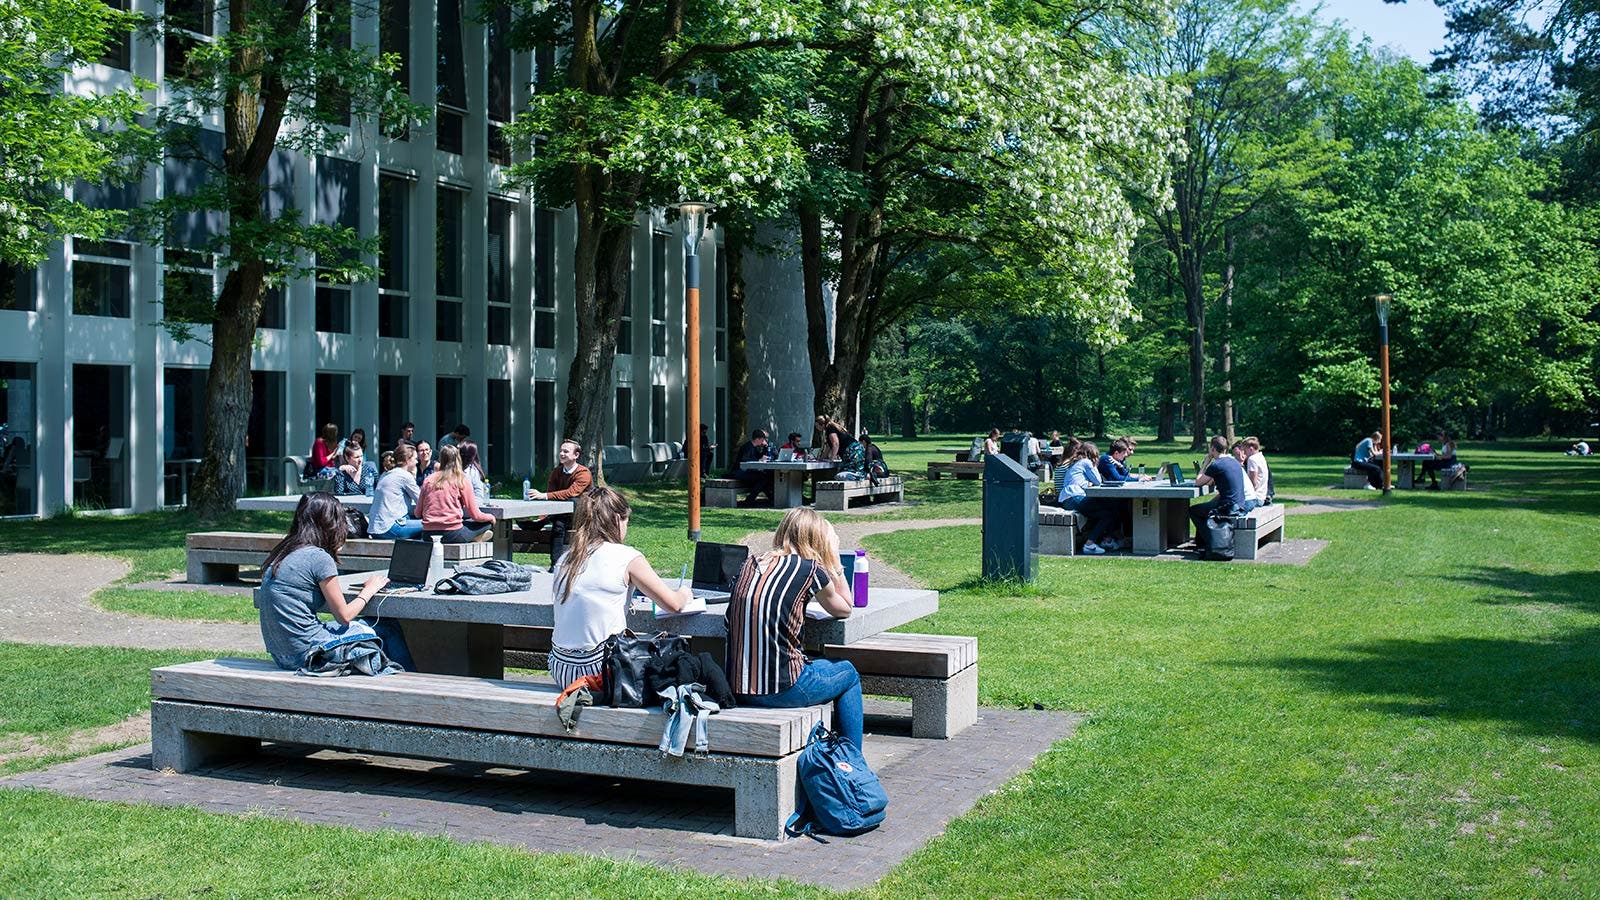 Green spaces on campus